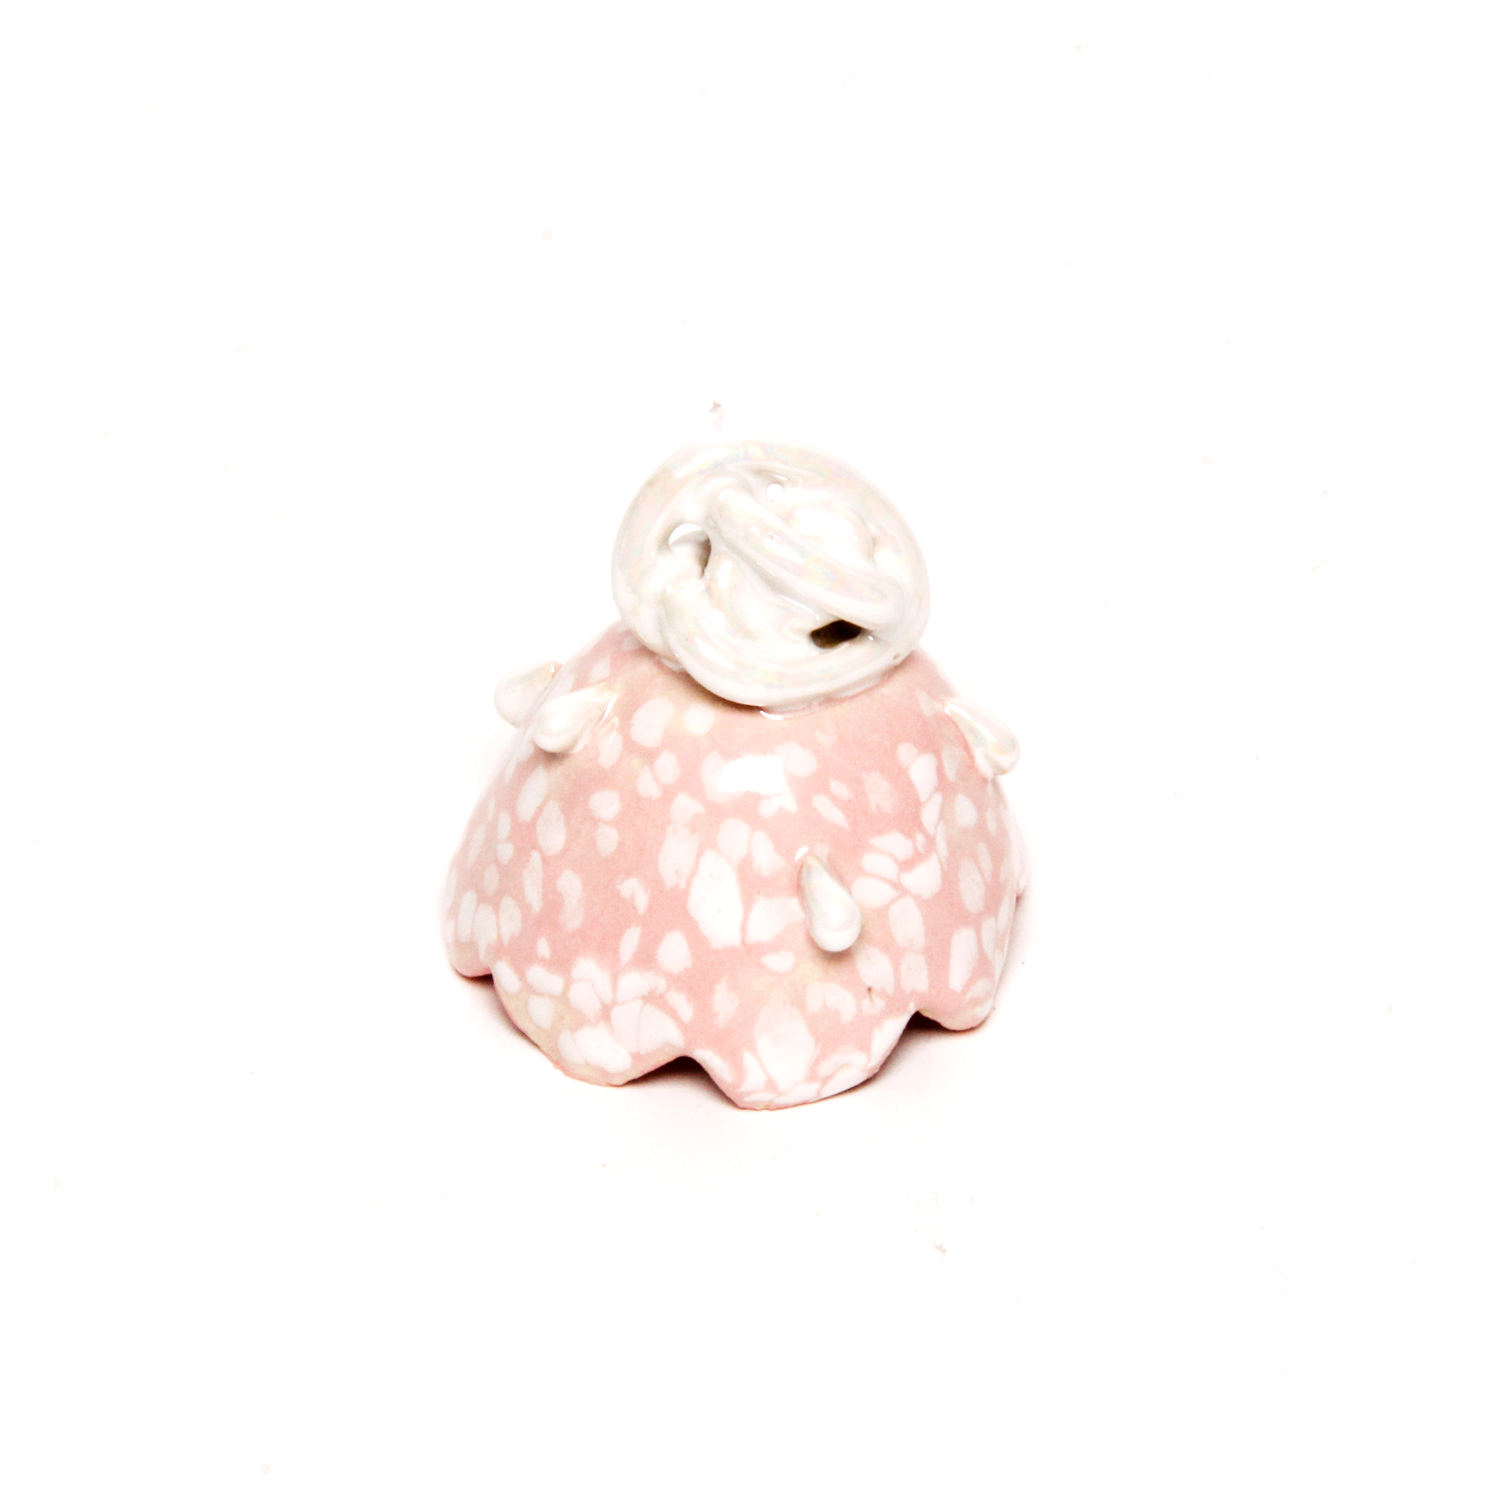 Hannah Faas: Small Sculpture in Raspberry Product Image 3 of 3